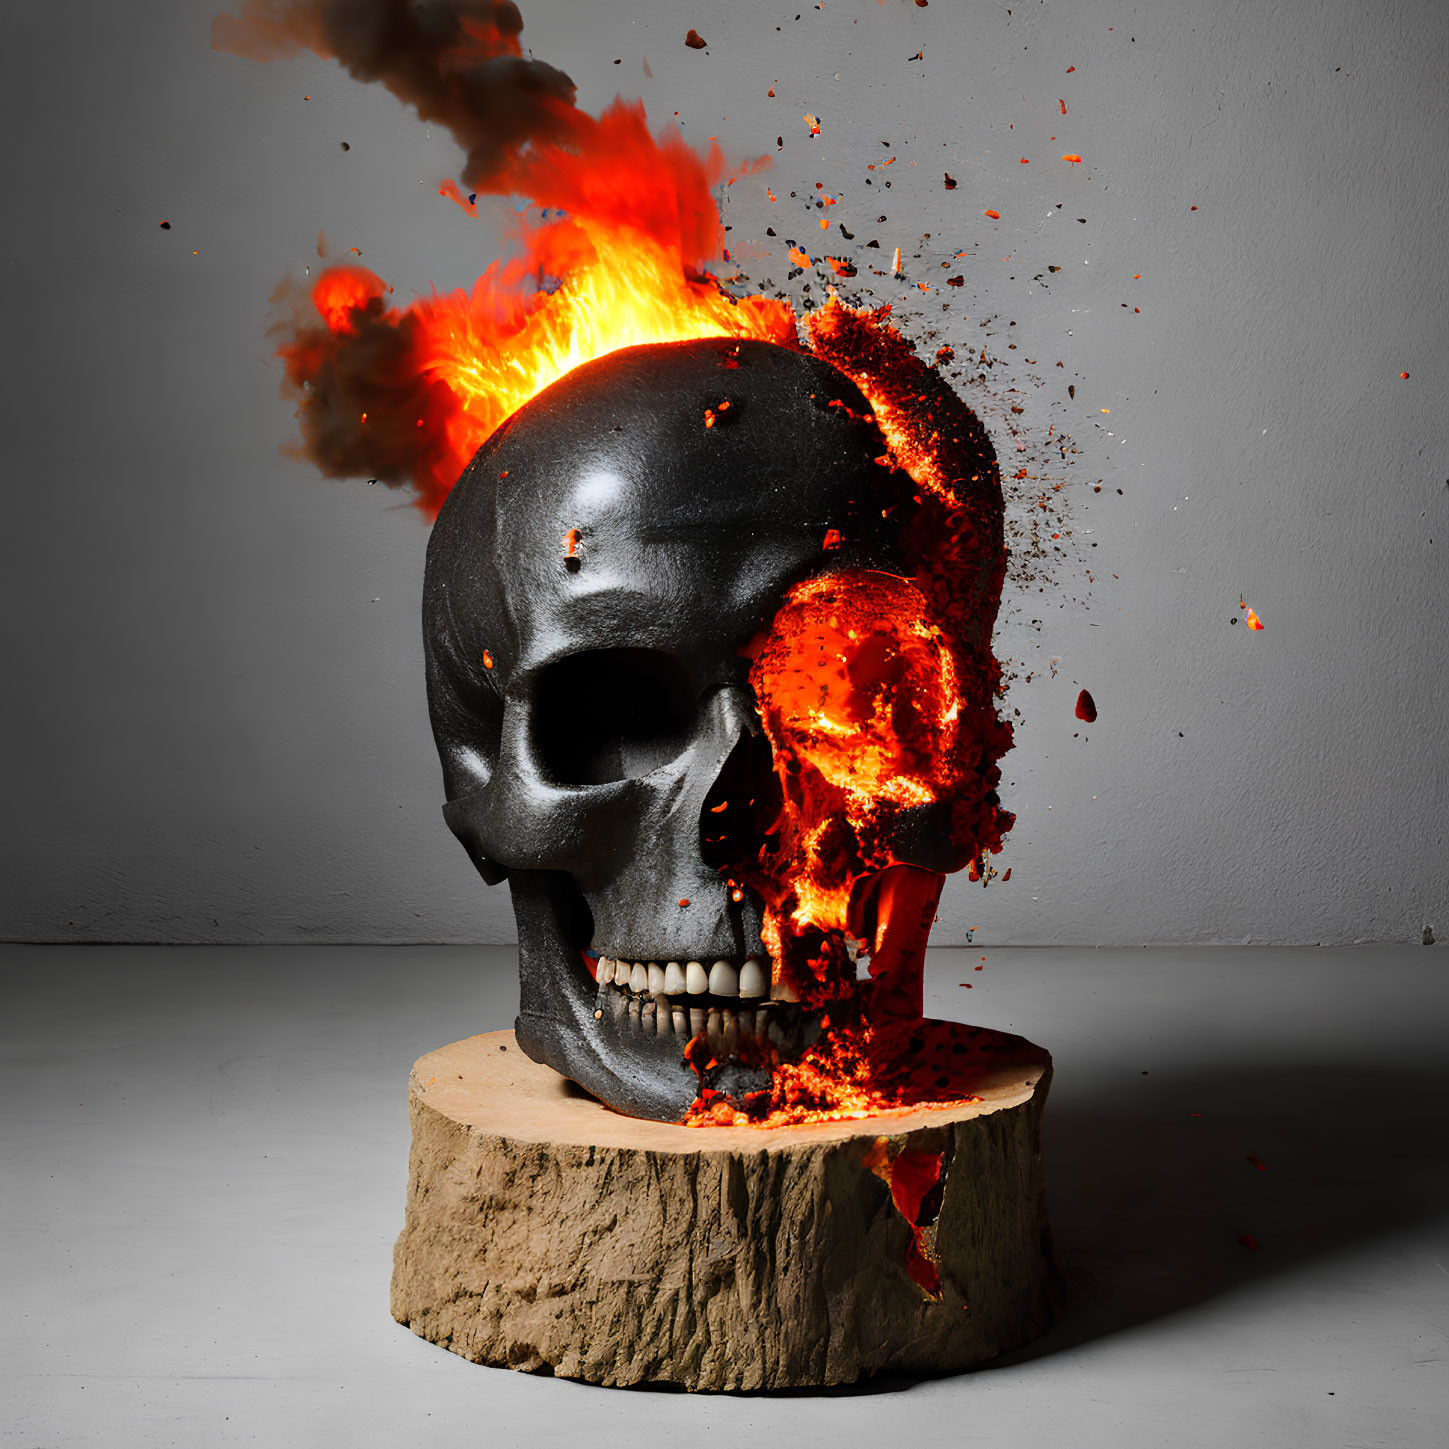 Metallic skull half-engulfed in flames on wood stump, exploding molten material against gray backdrop